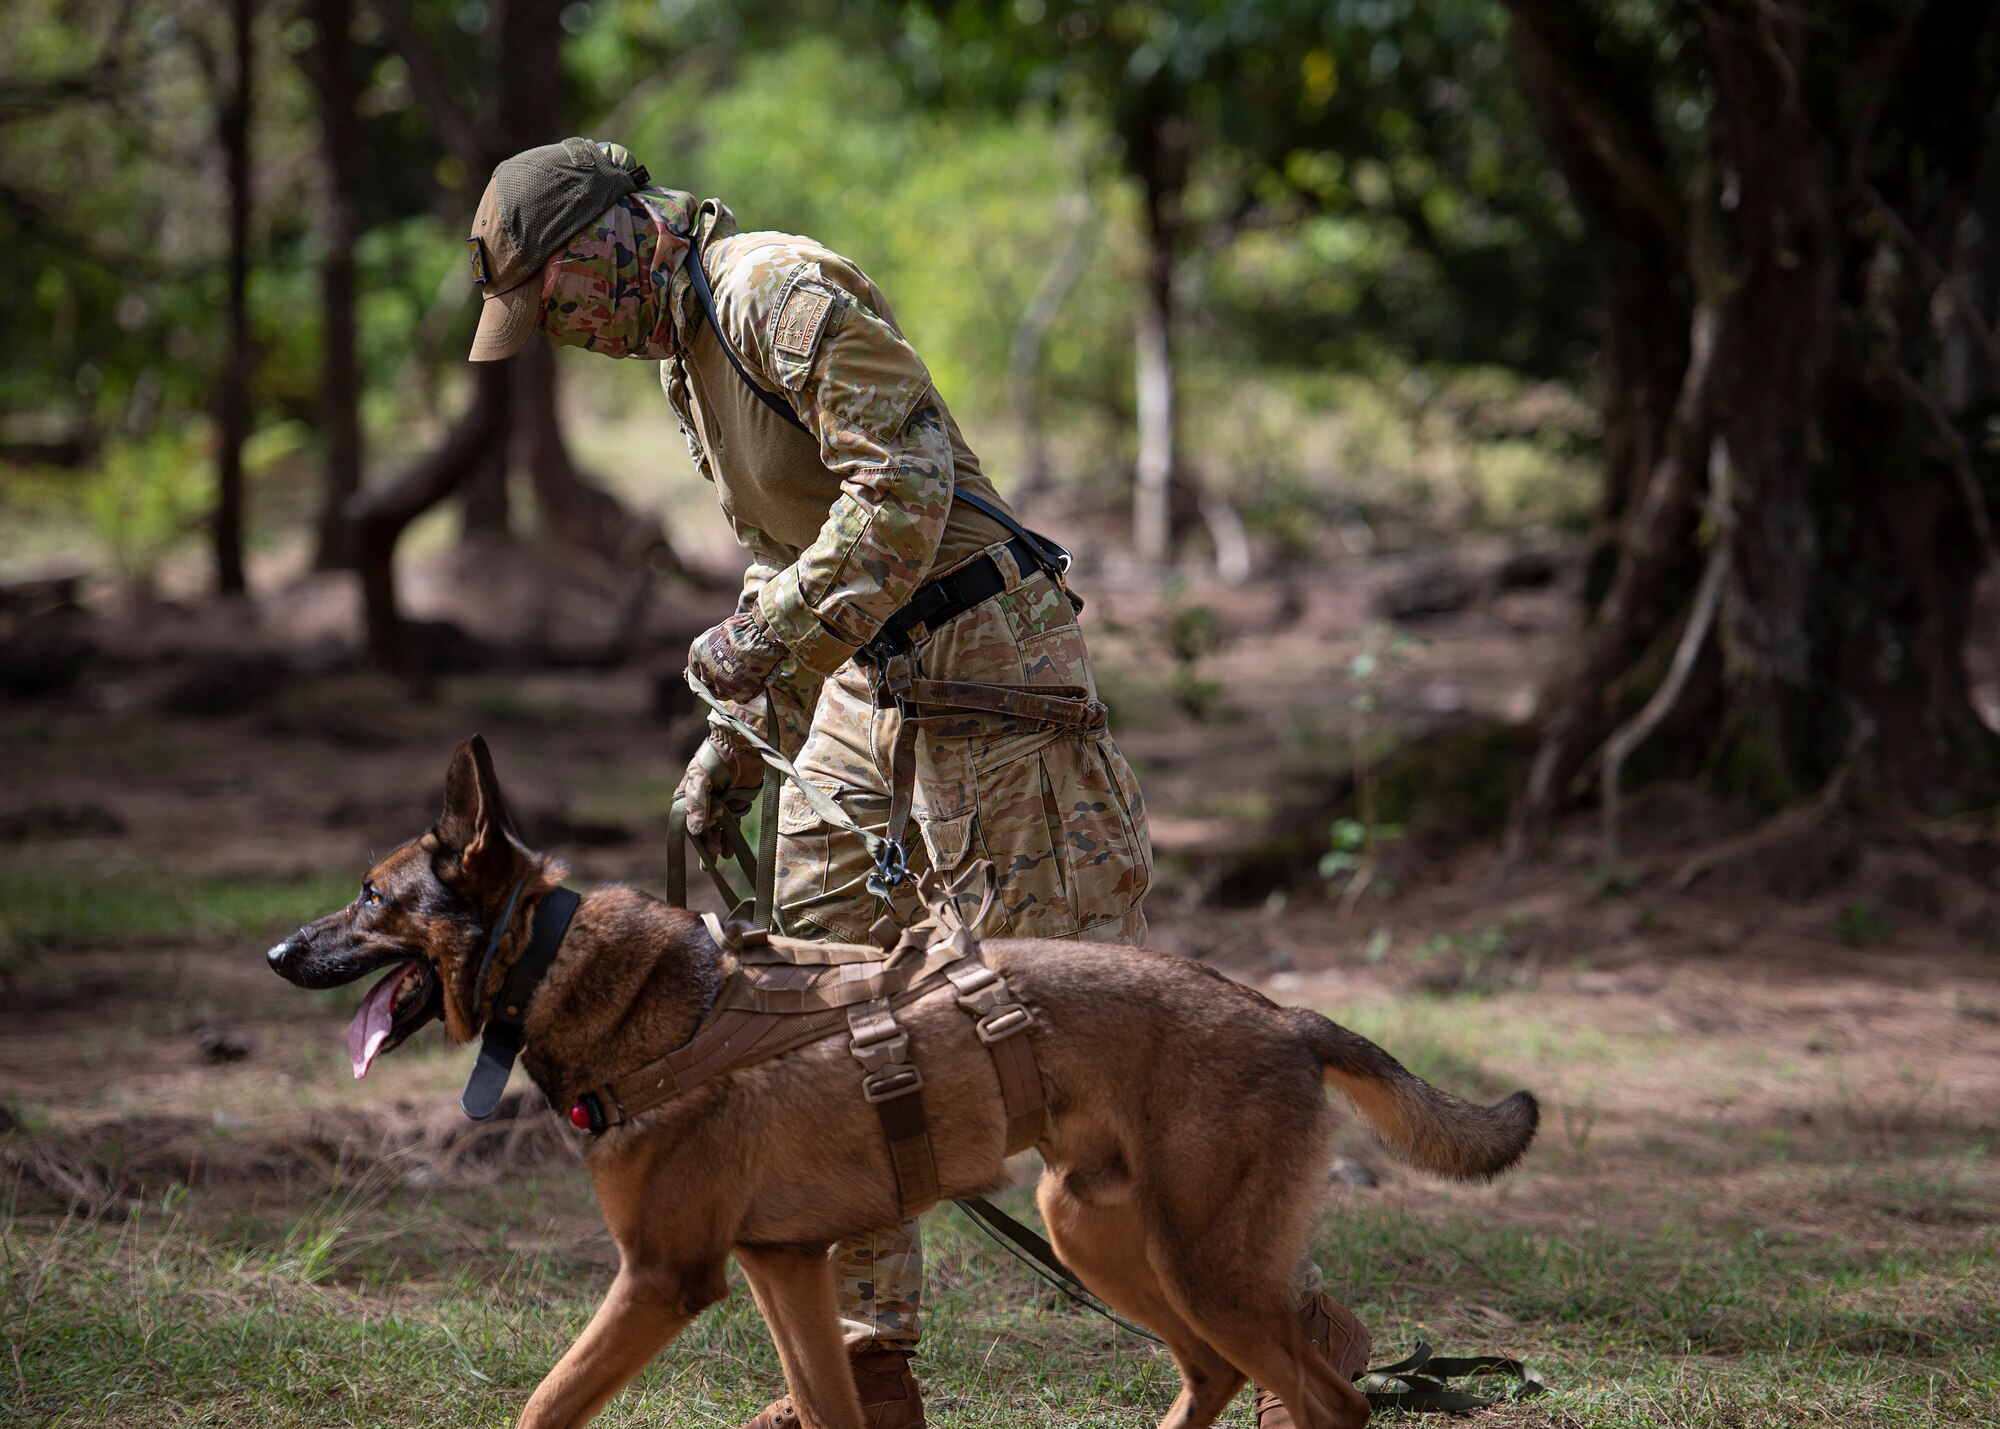 LACW Christina Smith, 2 Security Forces Squadron Tindal, Australia, military working dog handler, follows a scent with her dog during Pacific Defender 21-1 at Andersen Air Force Base, Guam, January 27 2021.